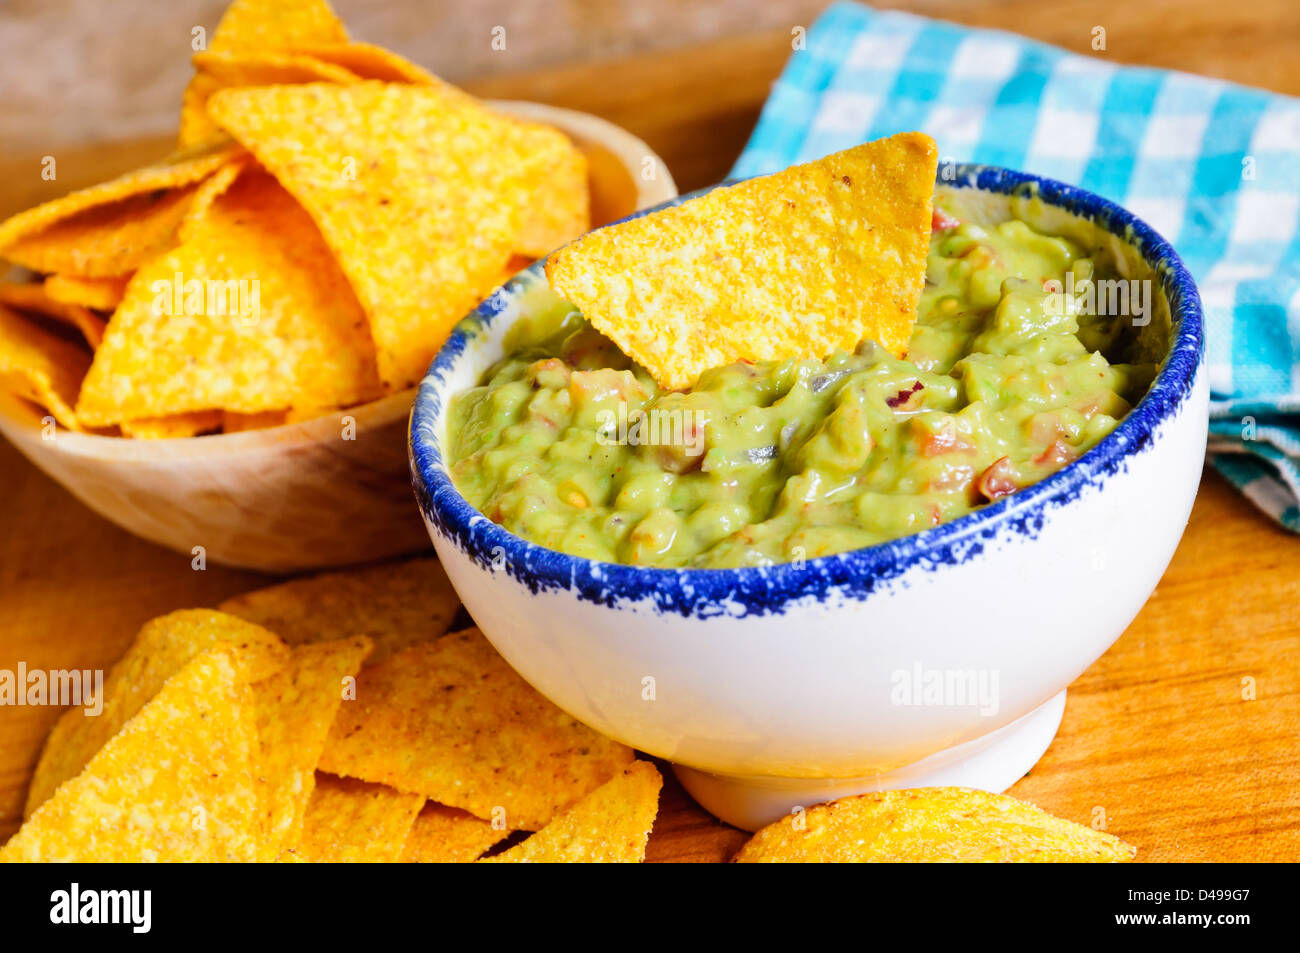 Tortilla chips with guacamole dip Stock Photo